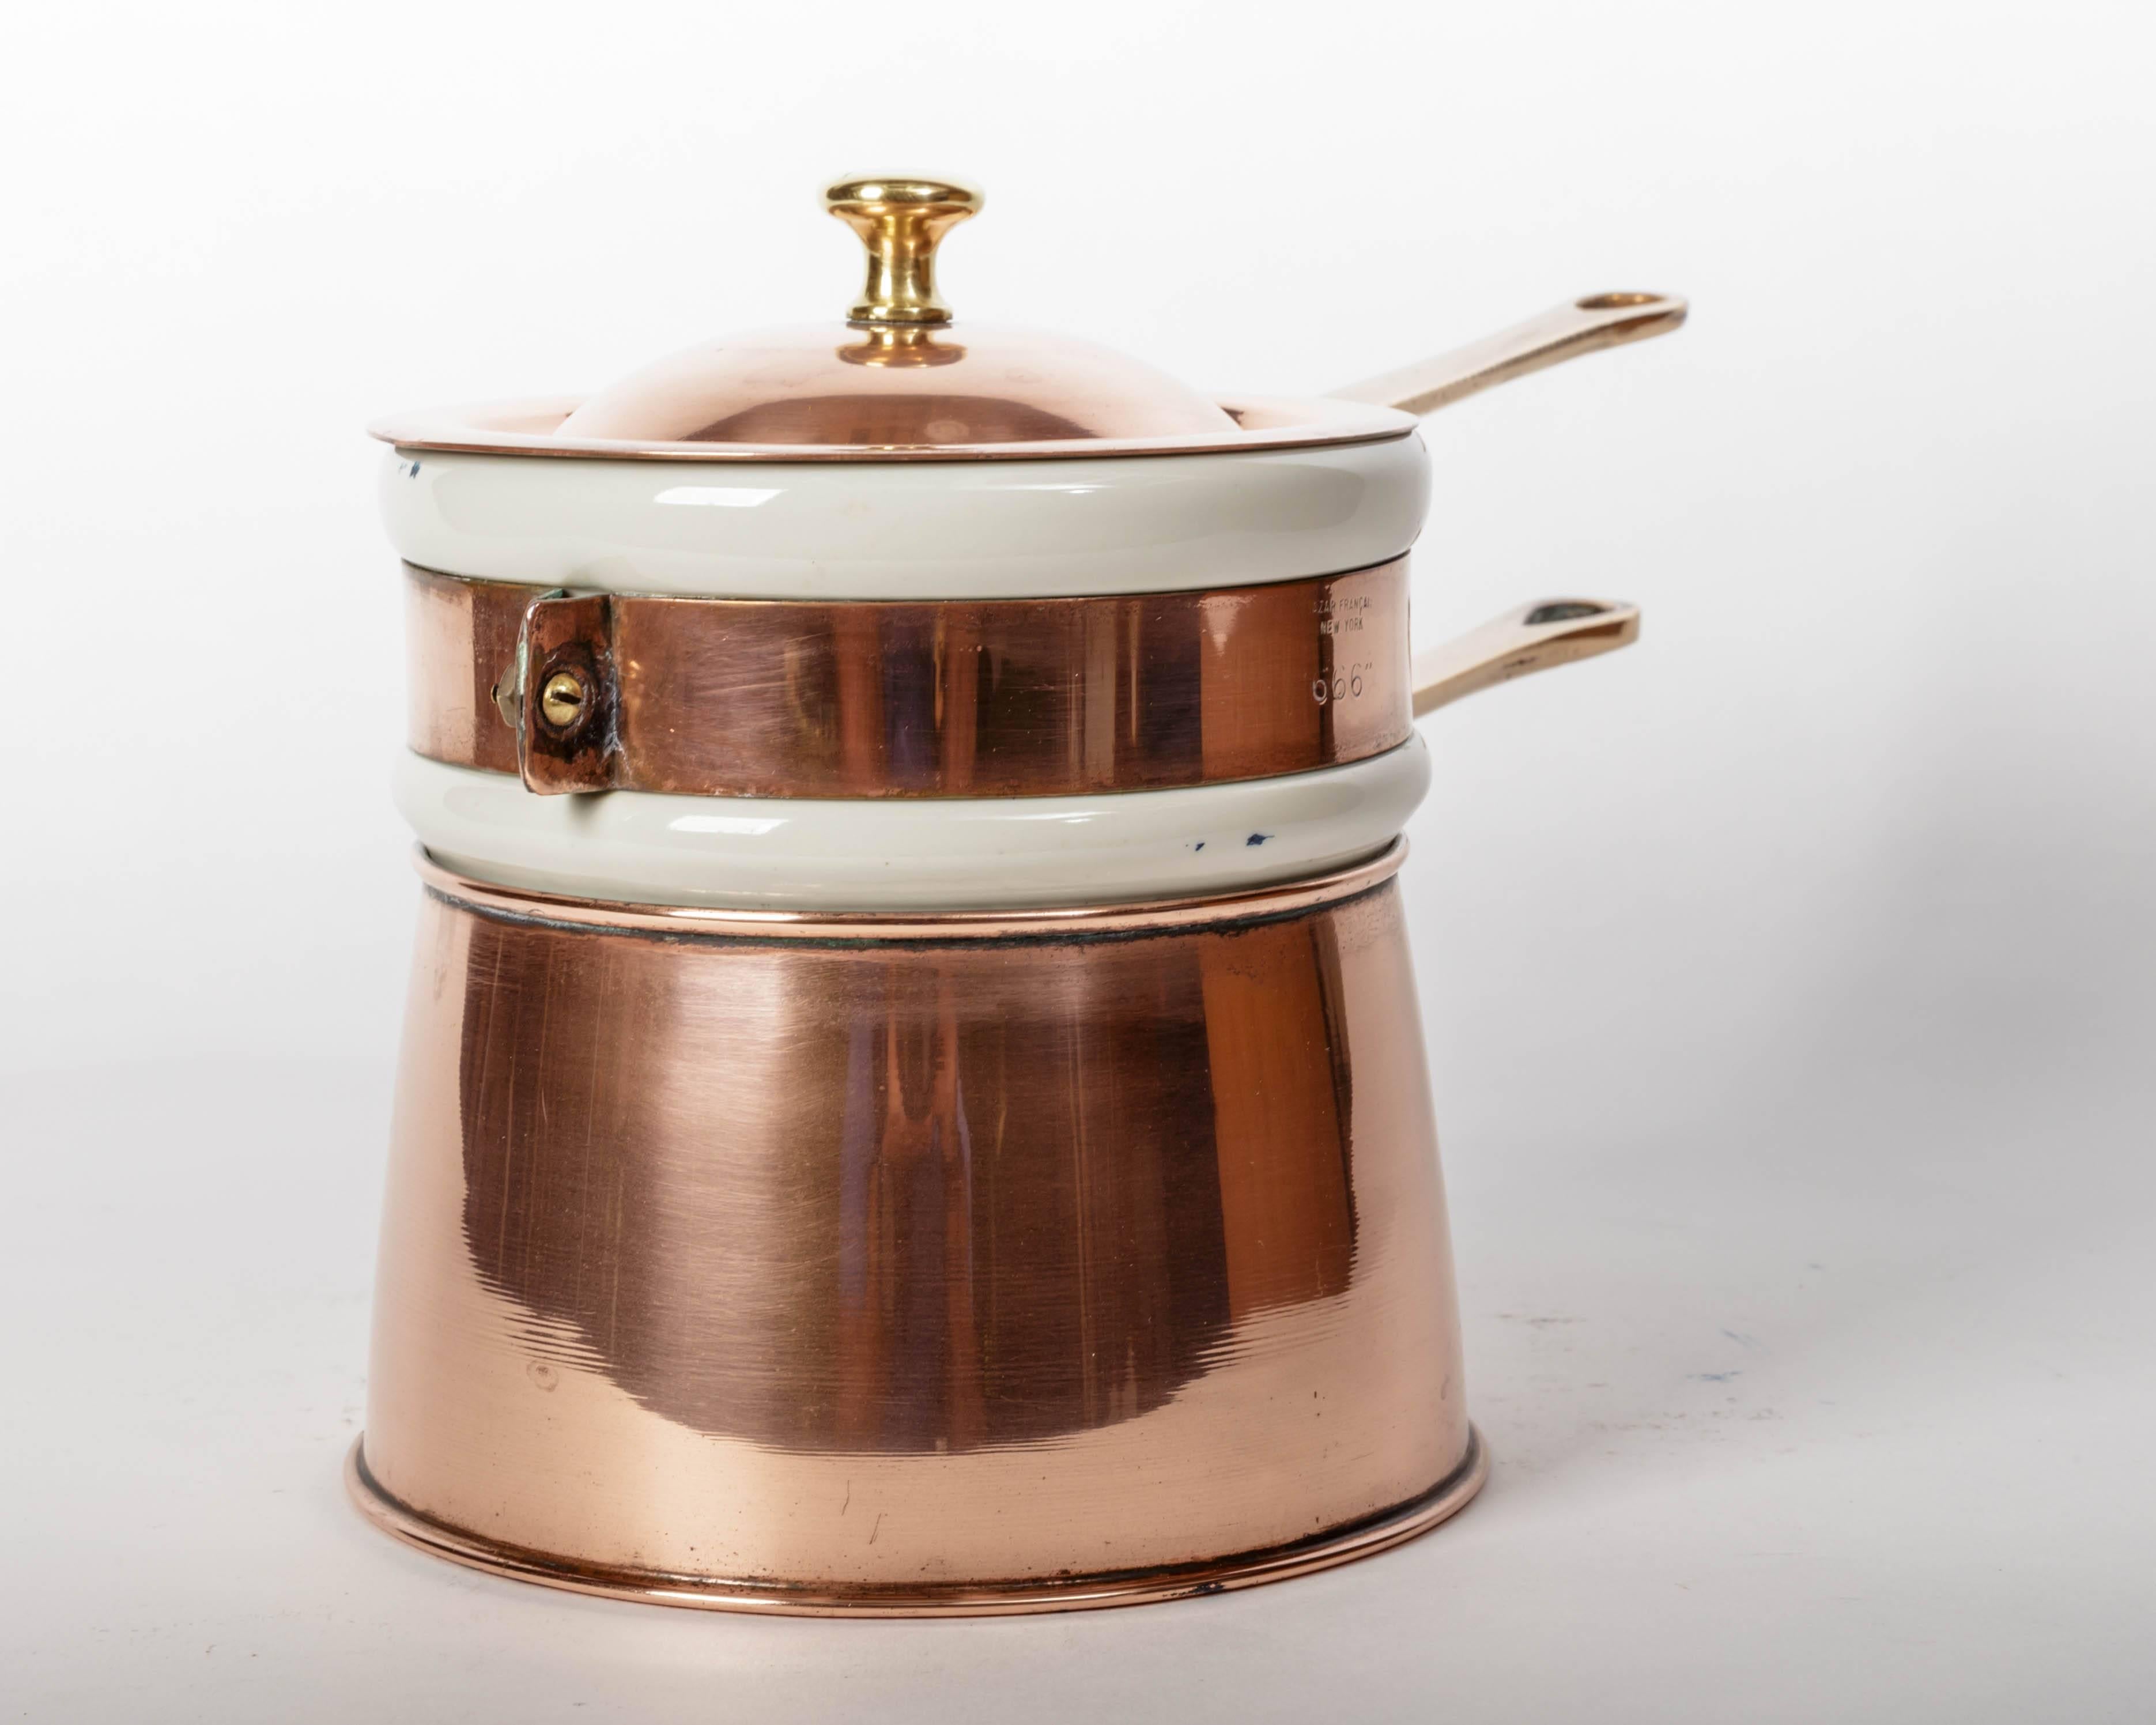 Copper and brass double boiler with white ceramic pot marked hall. The ceramic pot has a copper band with a brass handle marked 